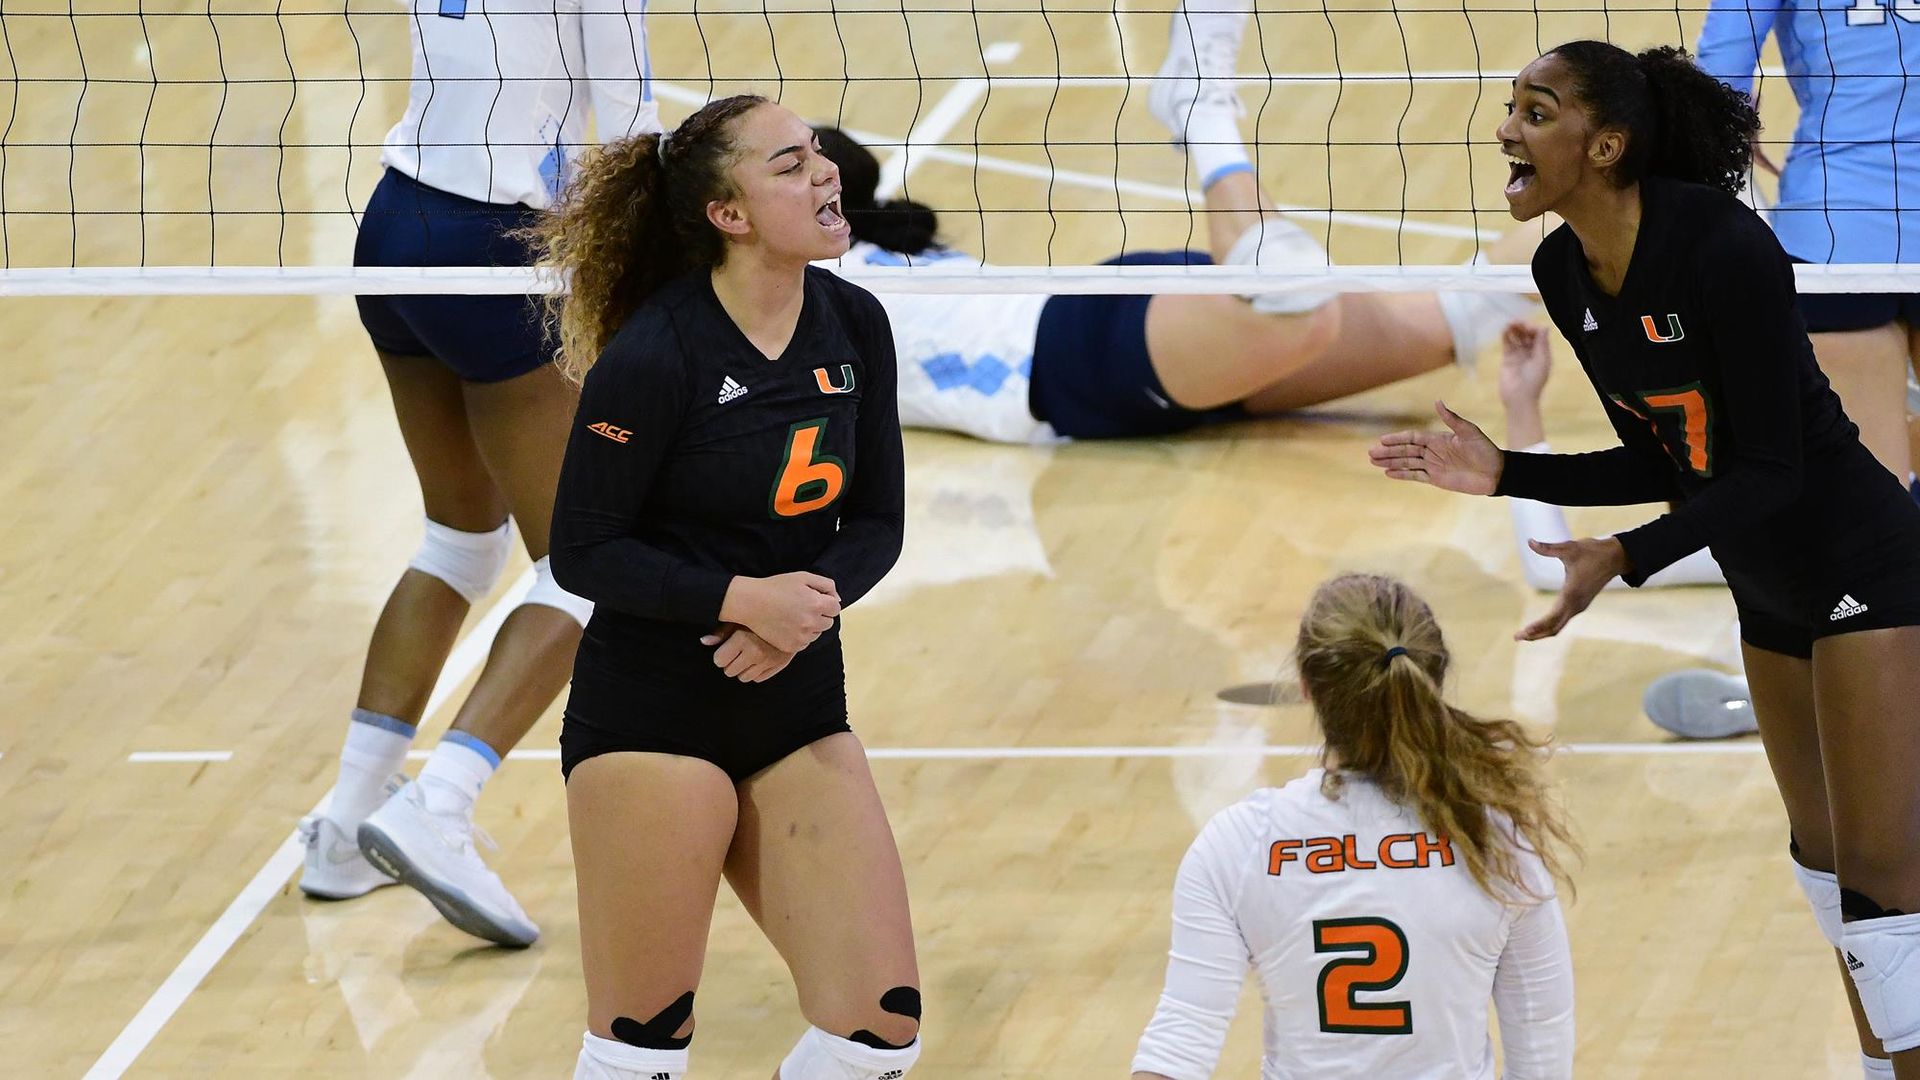 Leao Posts Career High in Blocks in 3-1 Loss at UNC